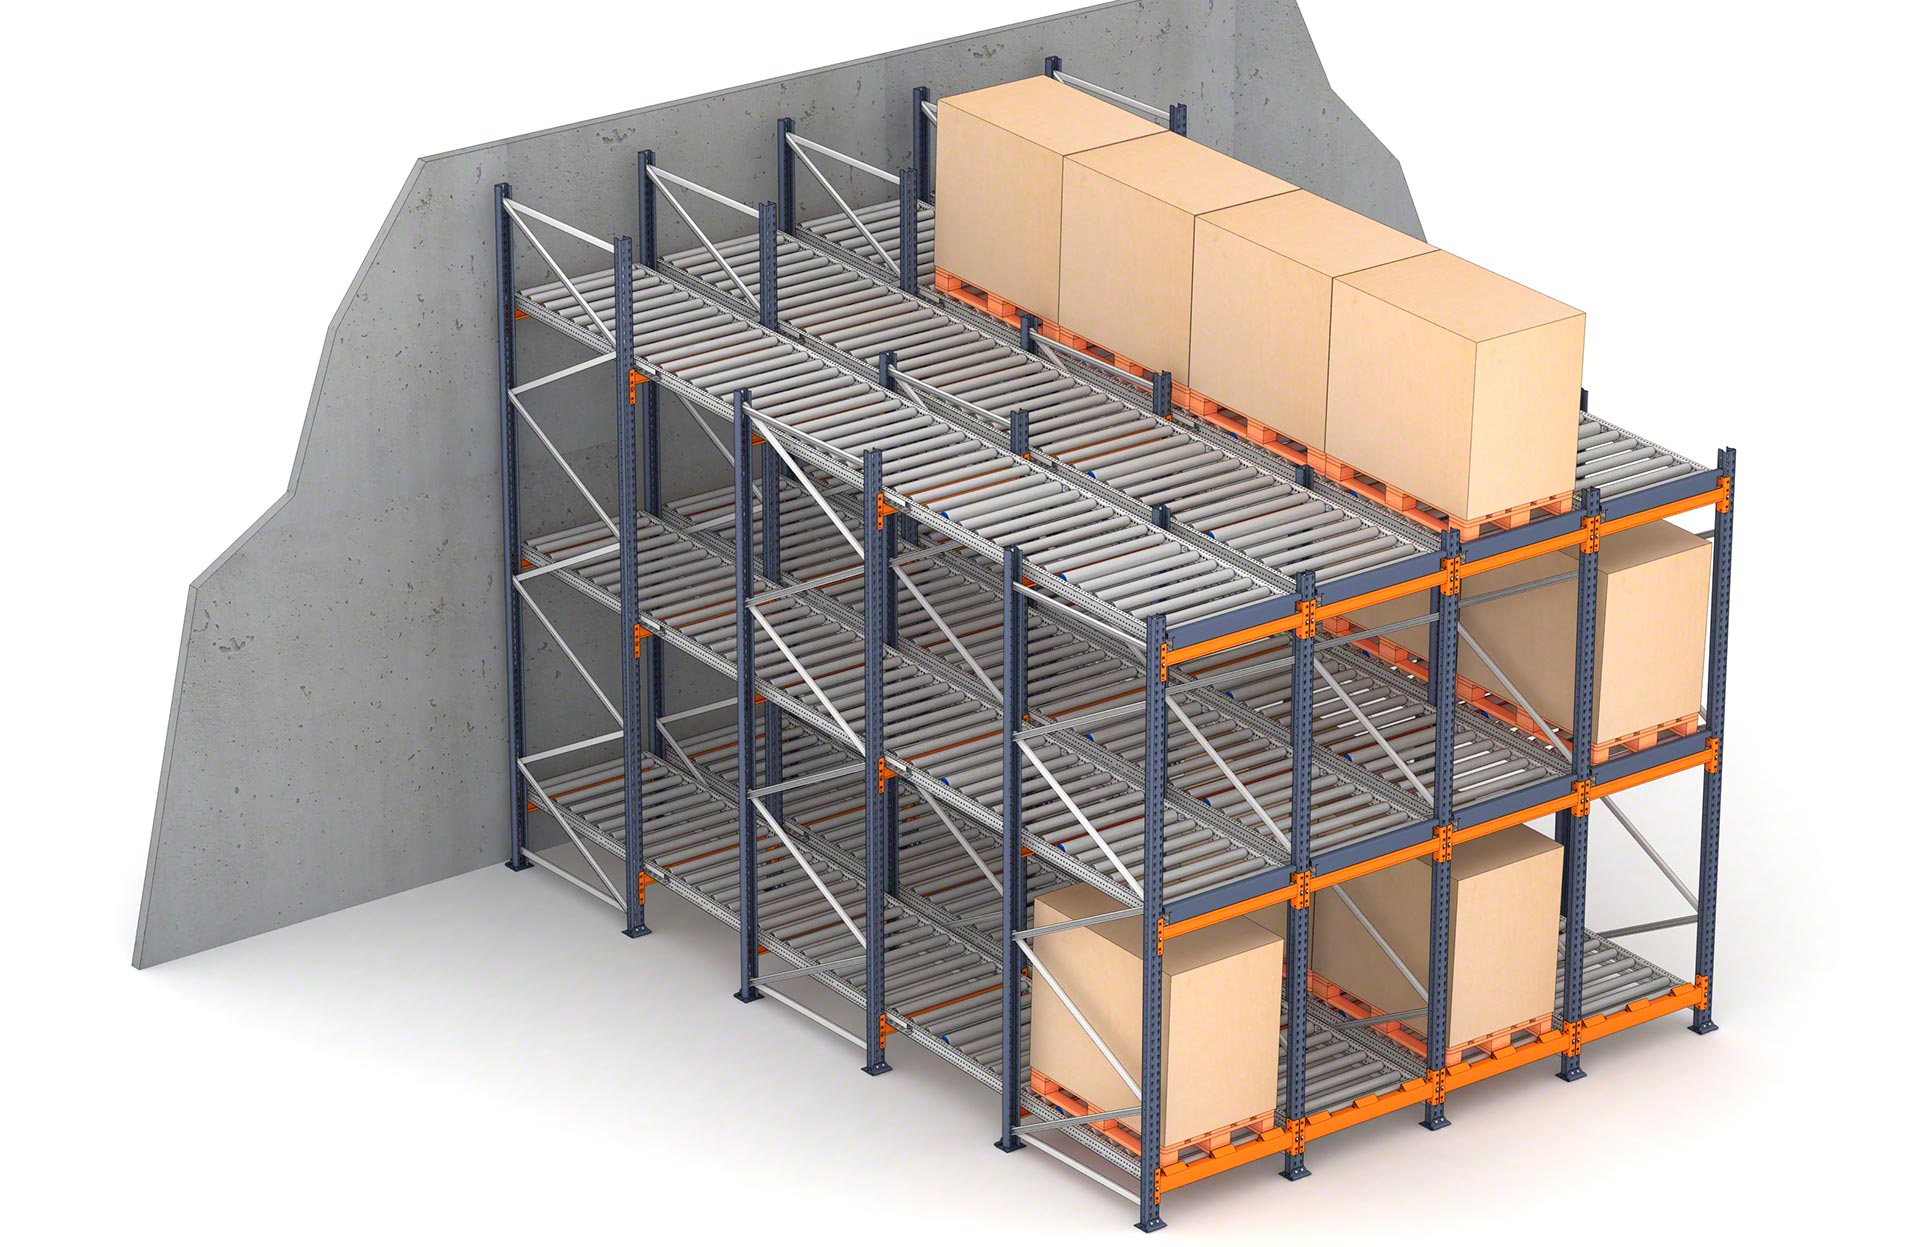 Push-back pallet racking with rollers shares the same main components as live pallet racking